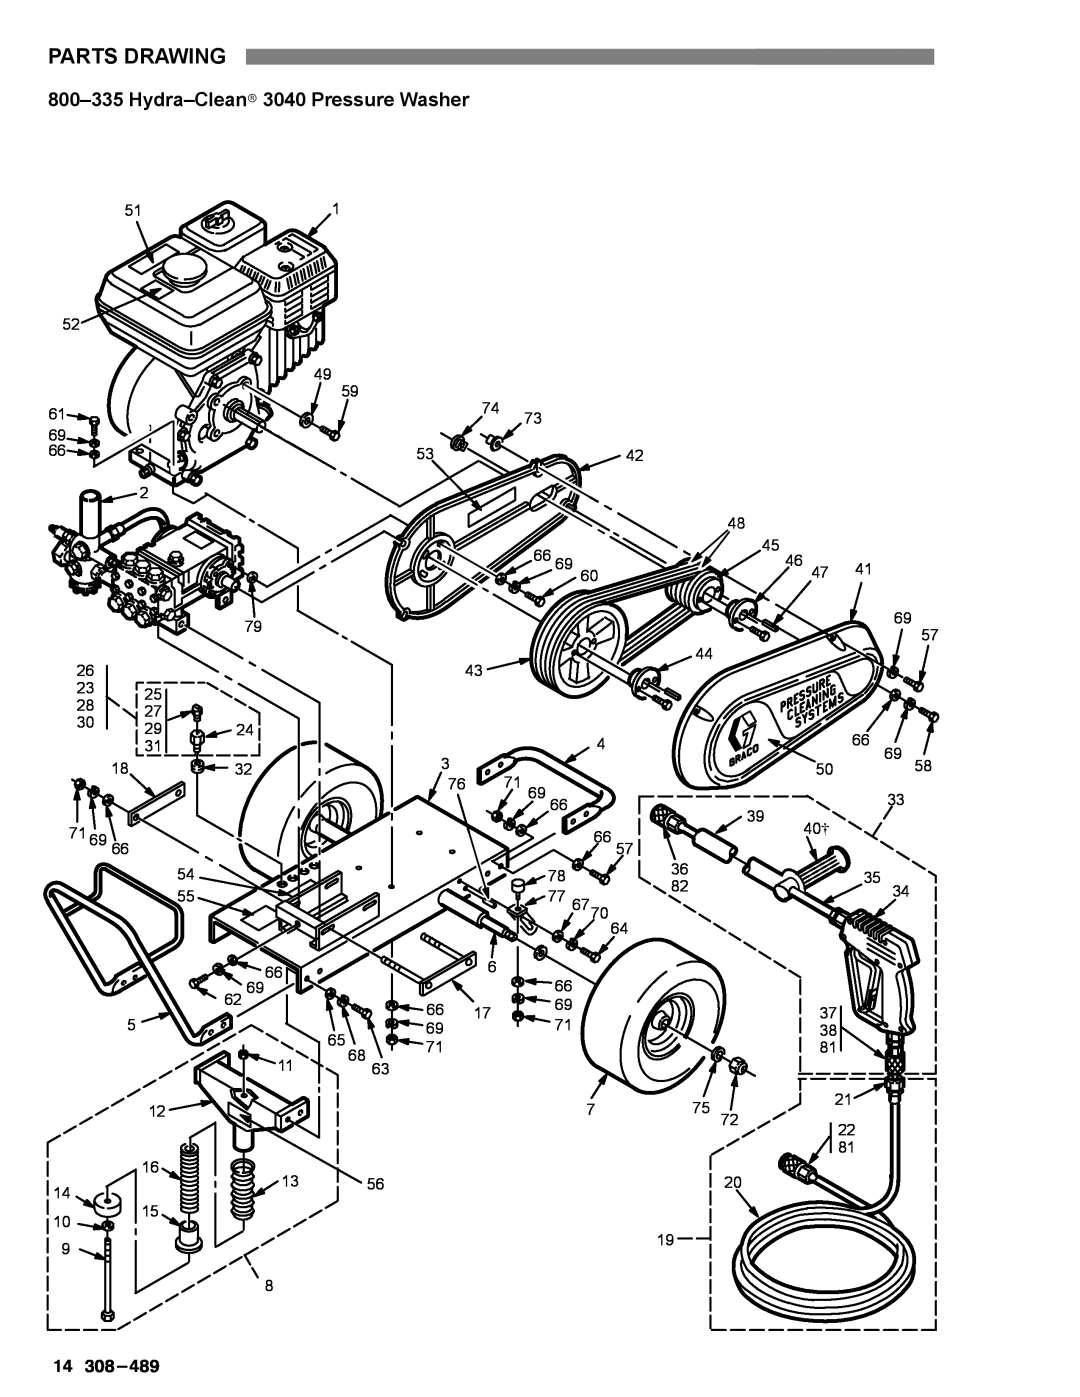 Graco Inc 308-501, 800-063, 800-062, 800-065, 800-335, 3035, 2245 manual Hydra-Cleanr 3040 Pressure Washer, Parts Drawing 